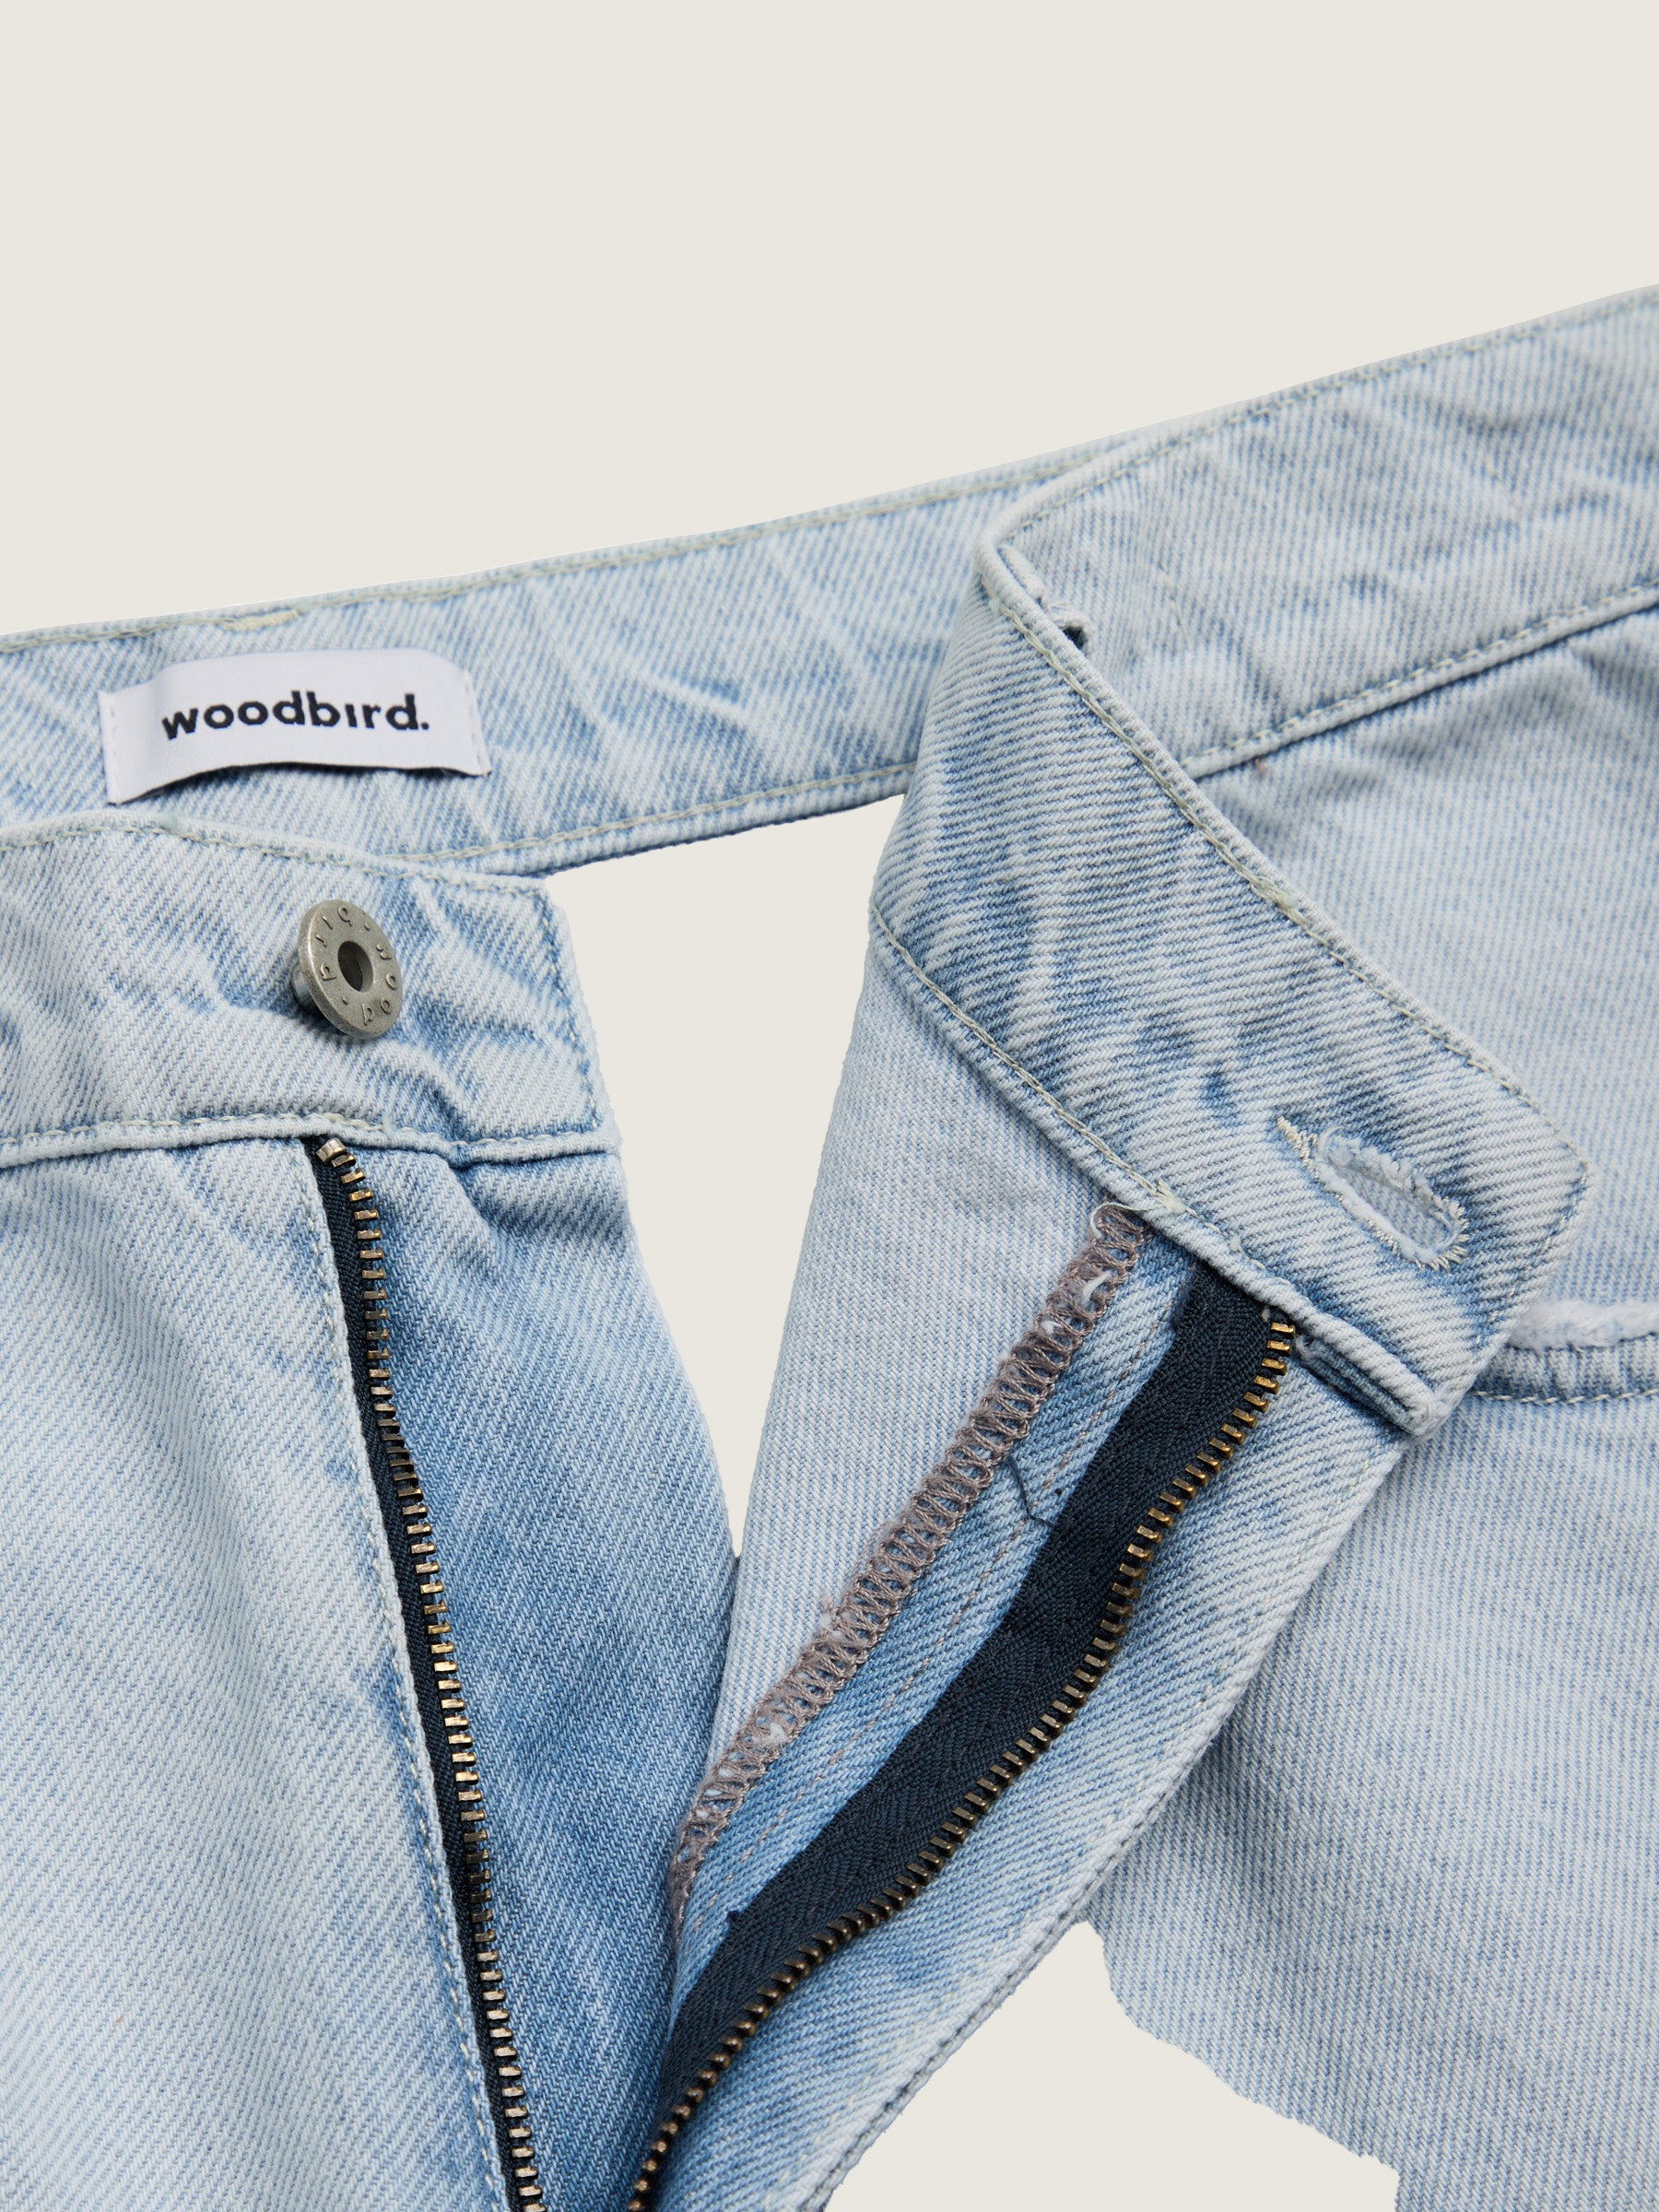 Woodbird Leroy Holiday Jeans Jeans Washed Blue